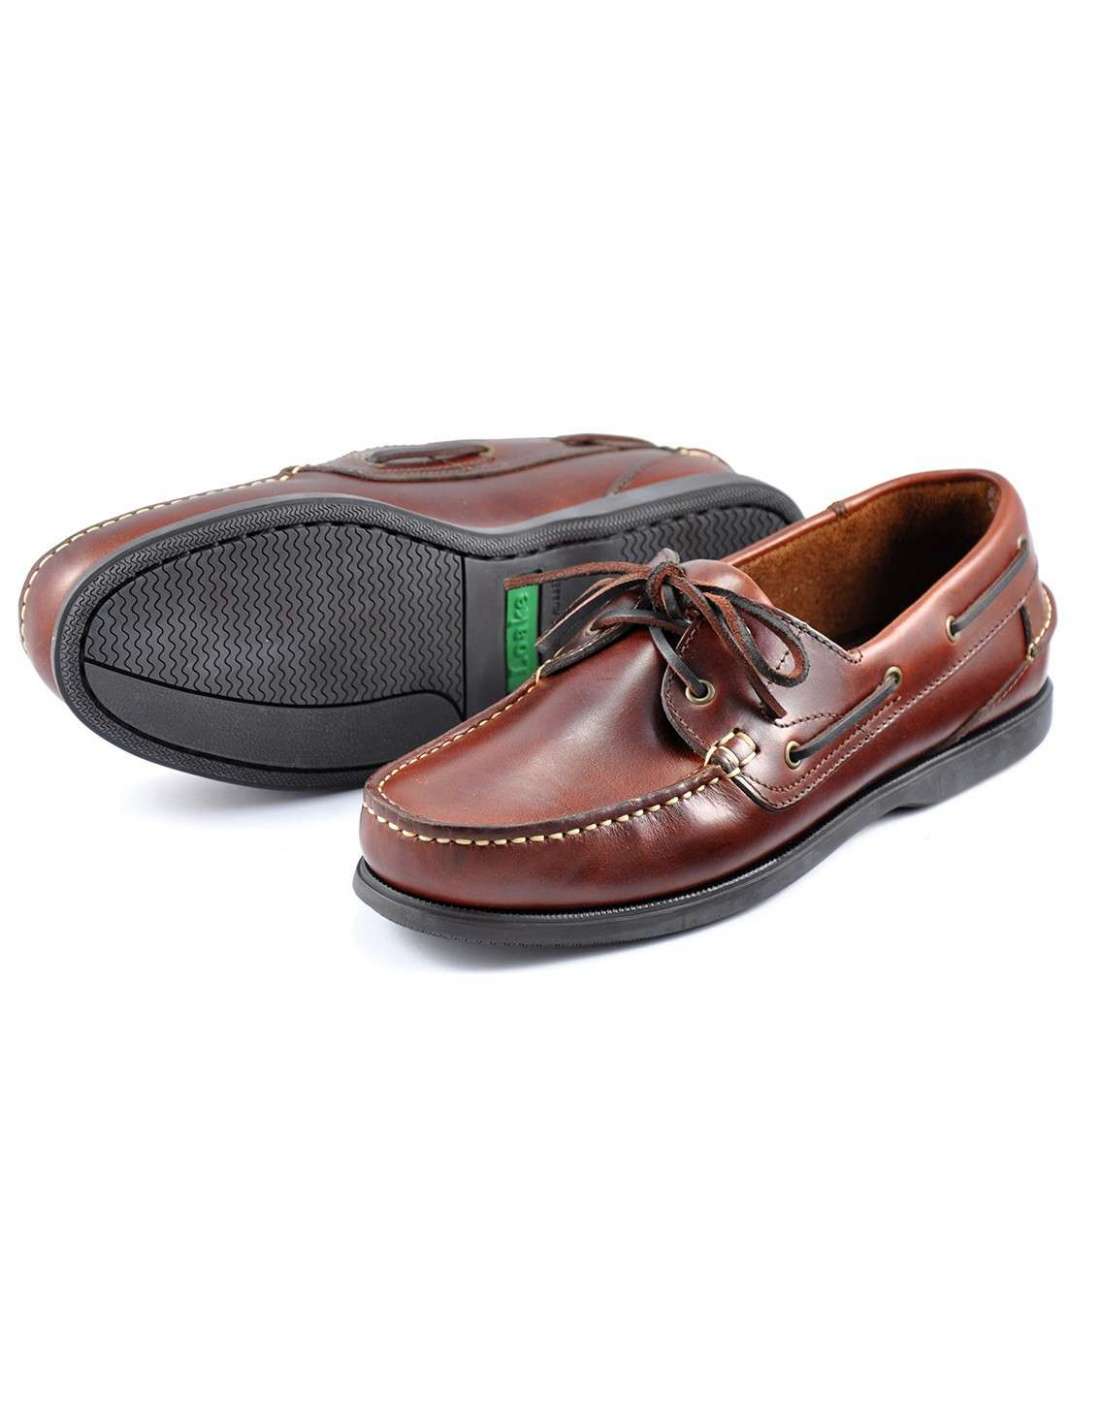 524 Boat shoes by Loake Shoemakers